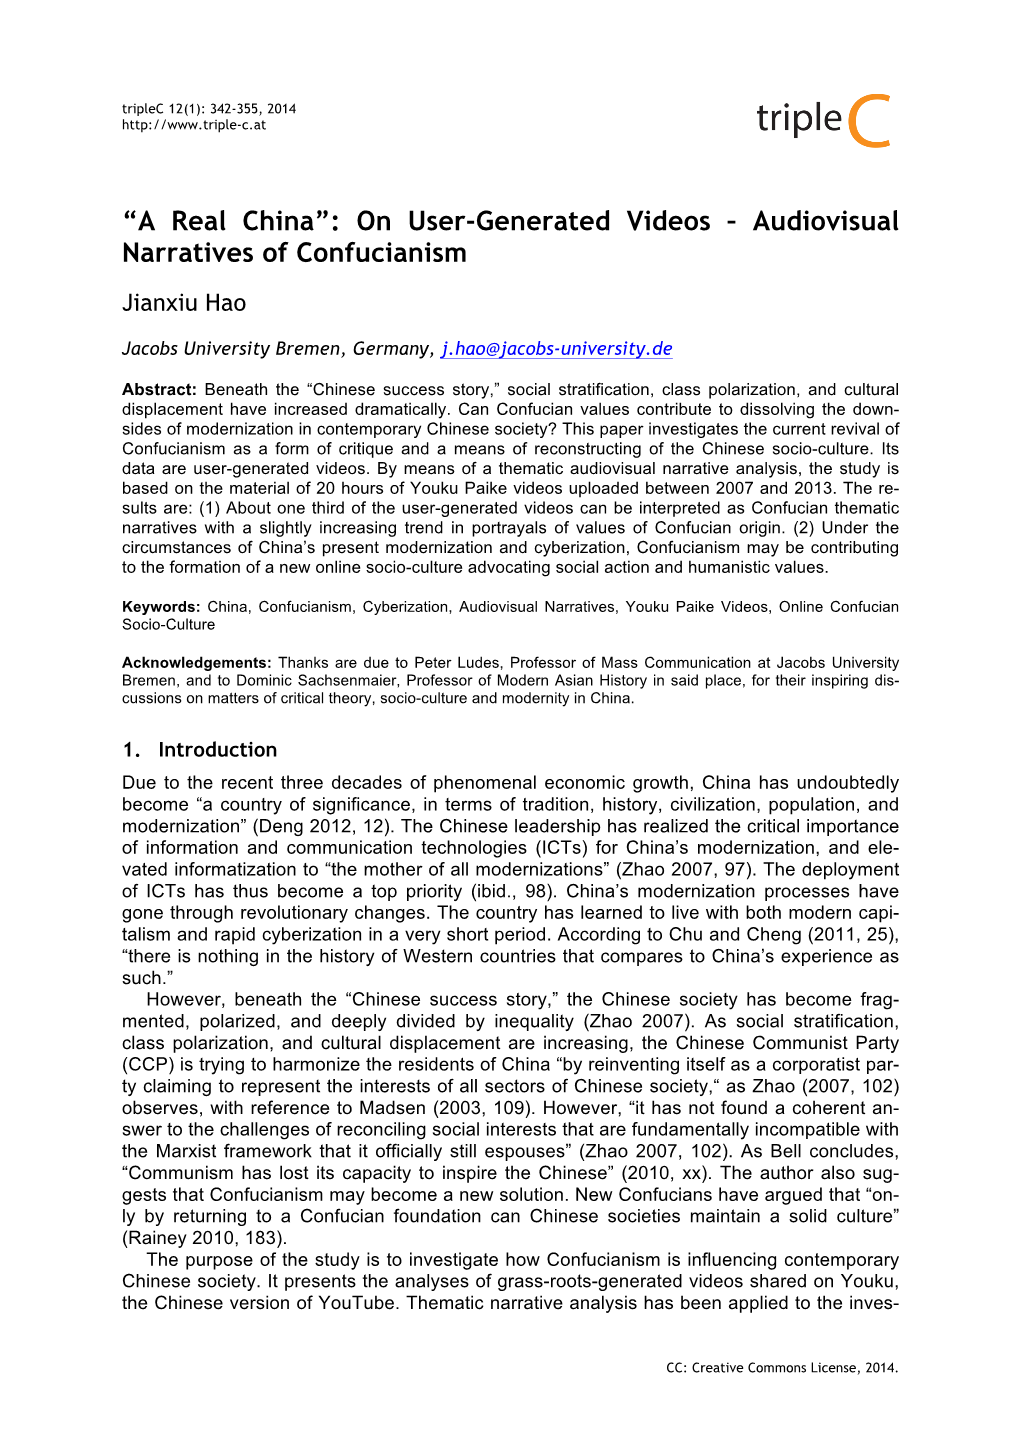 “A Real China”: on User-Generated Videos – Audiovisual Narratives of Confucianism